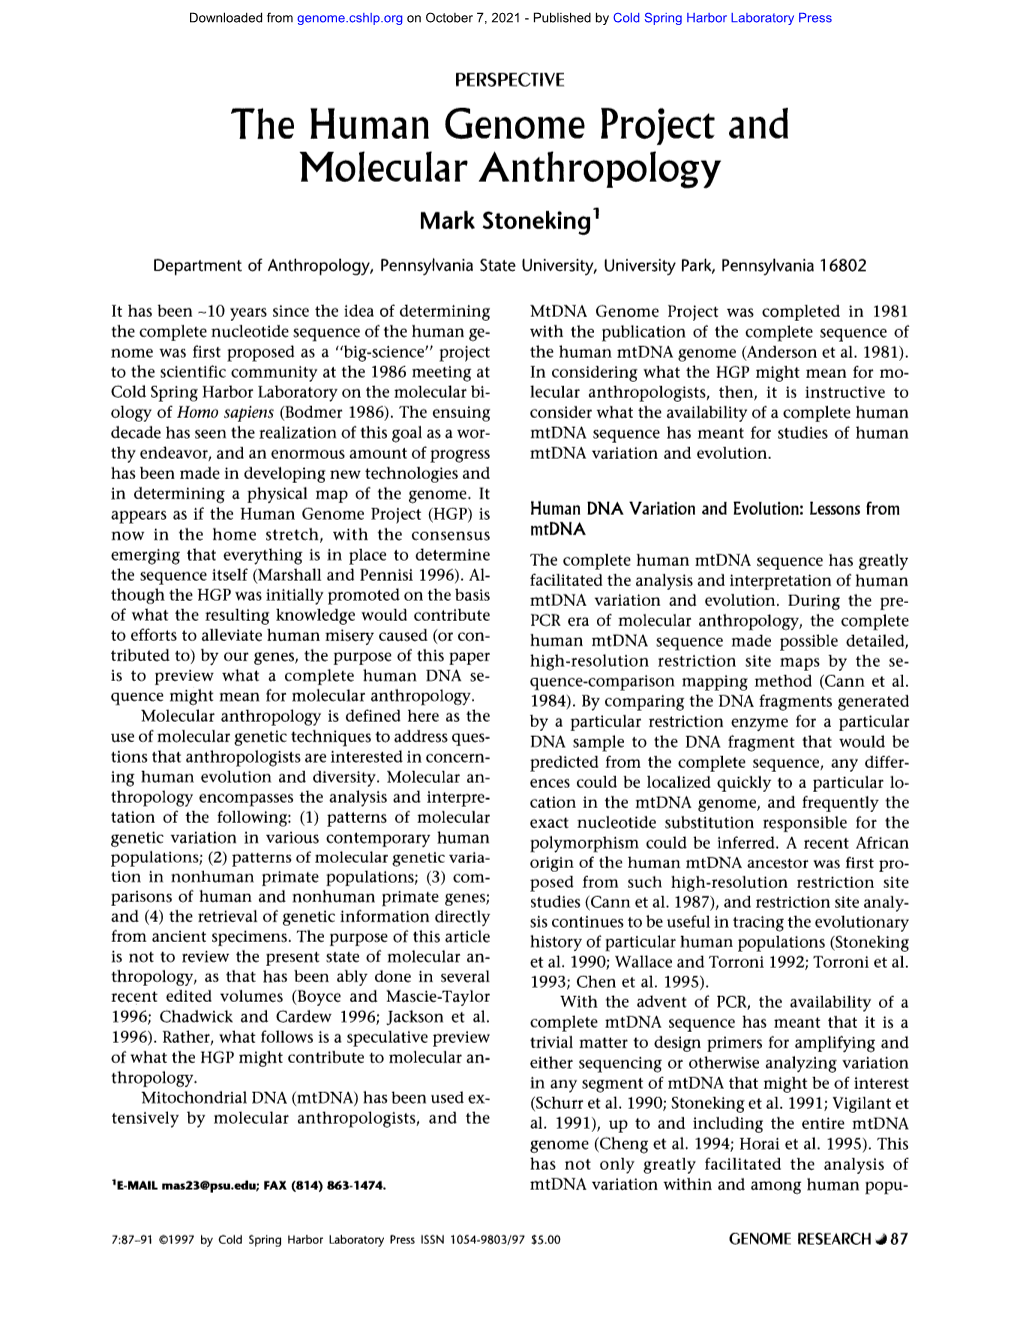 The Human Genome Project and Molecular Anthropology Mark Stoneking 1